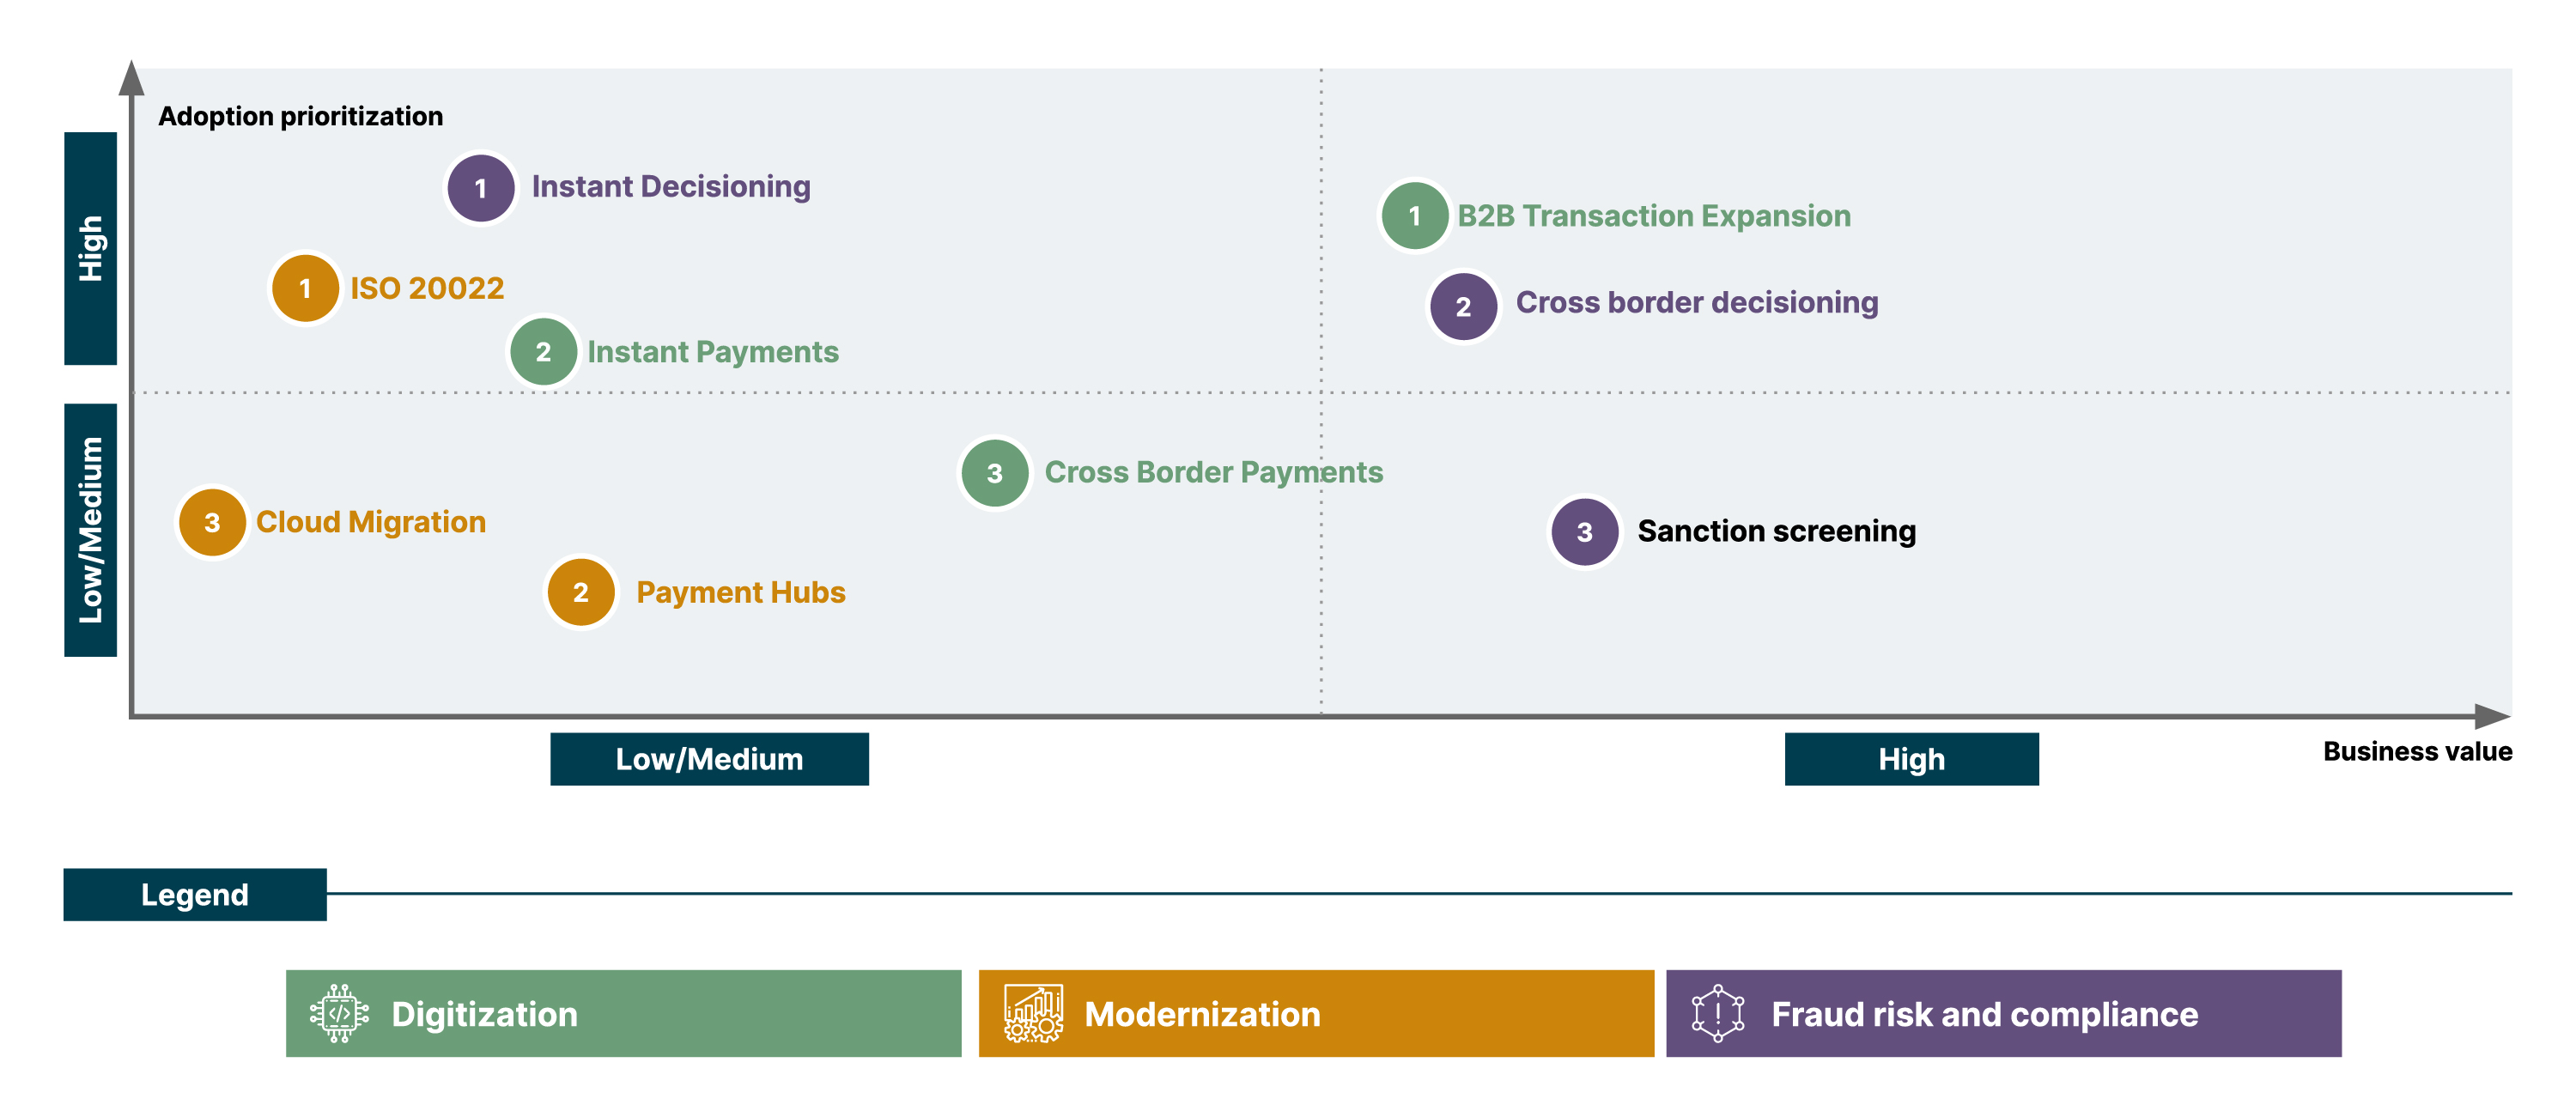 A matrix showing payments options, ranked according to business value and priority